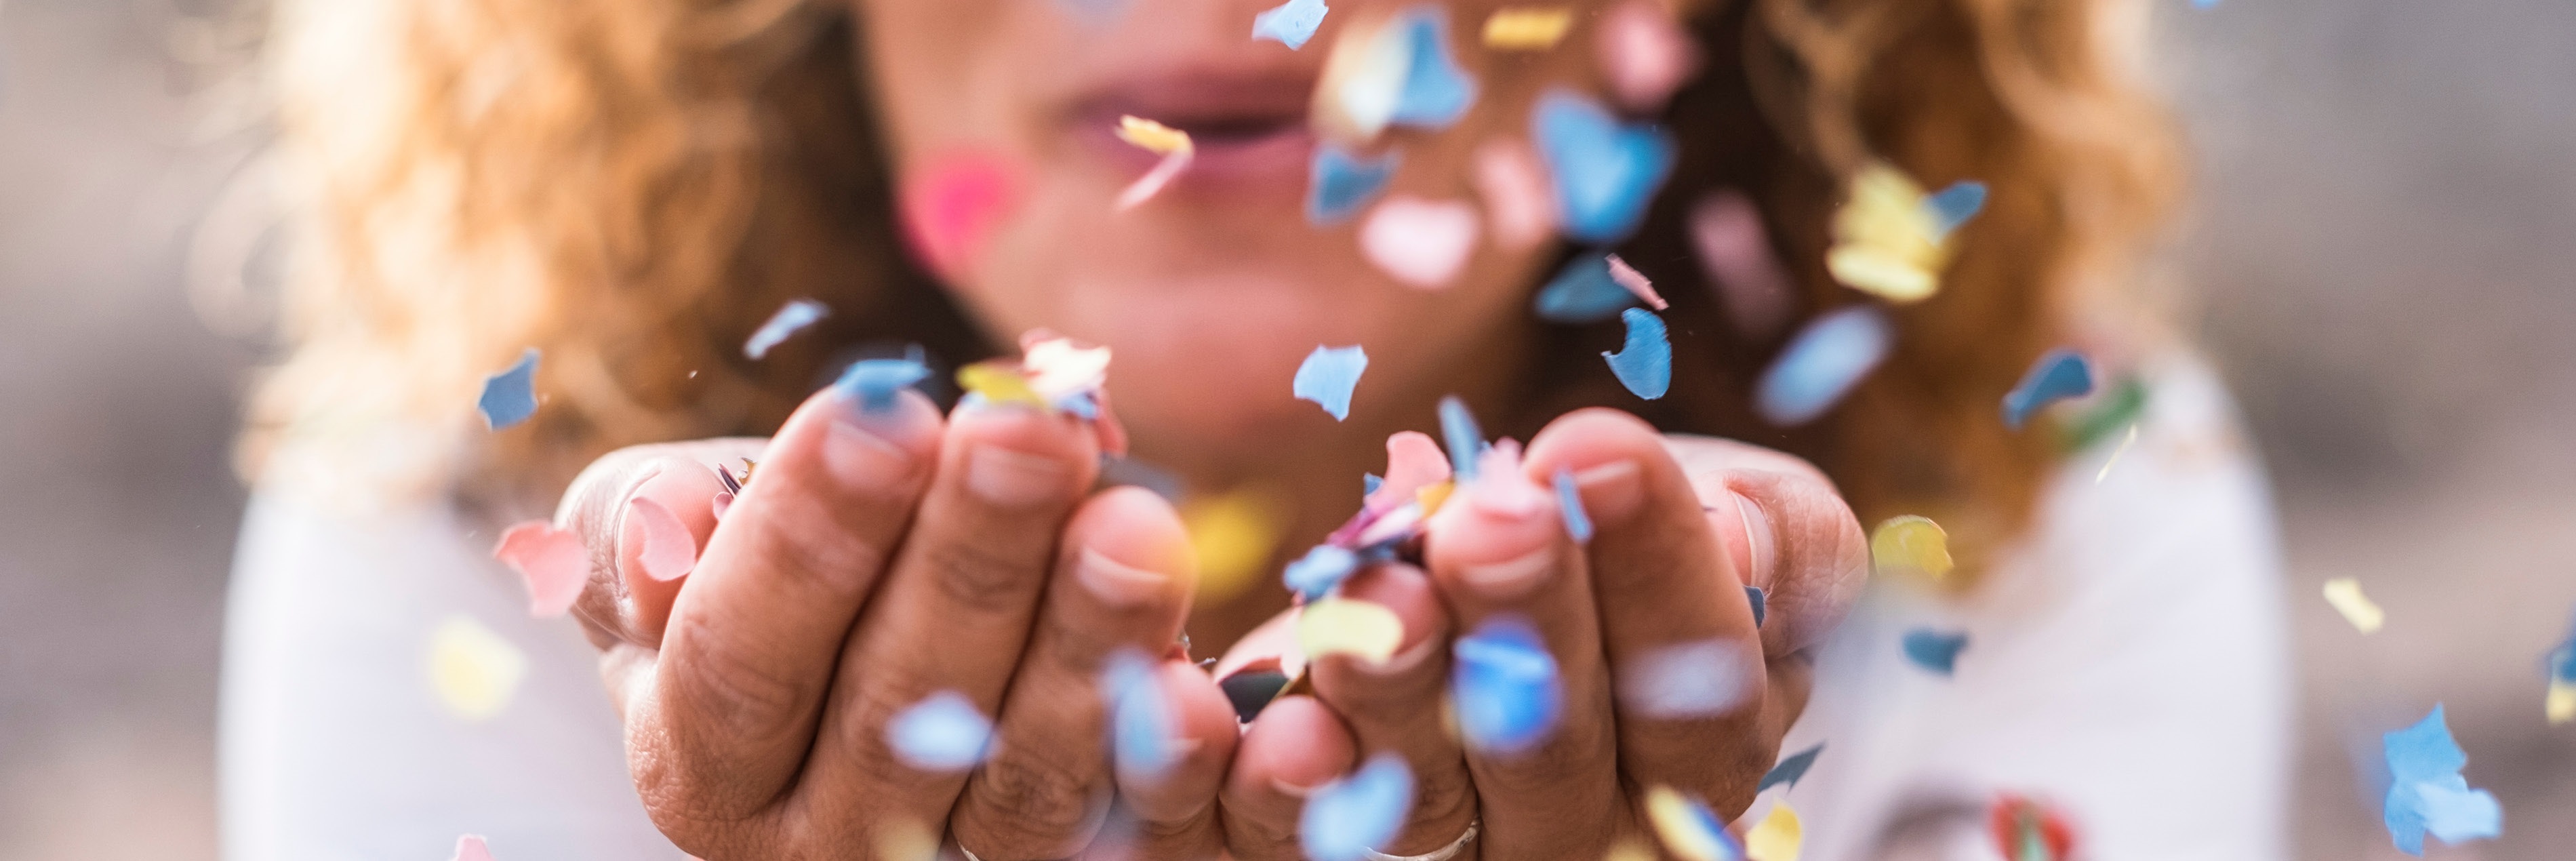 photo of person blowing confetti in their hands